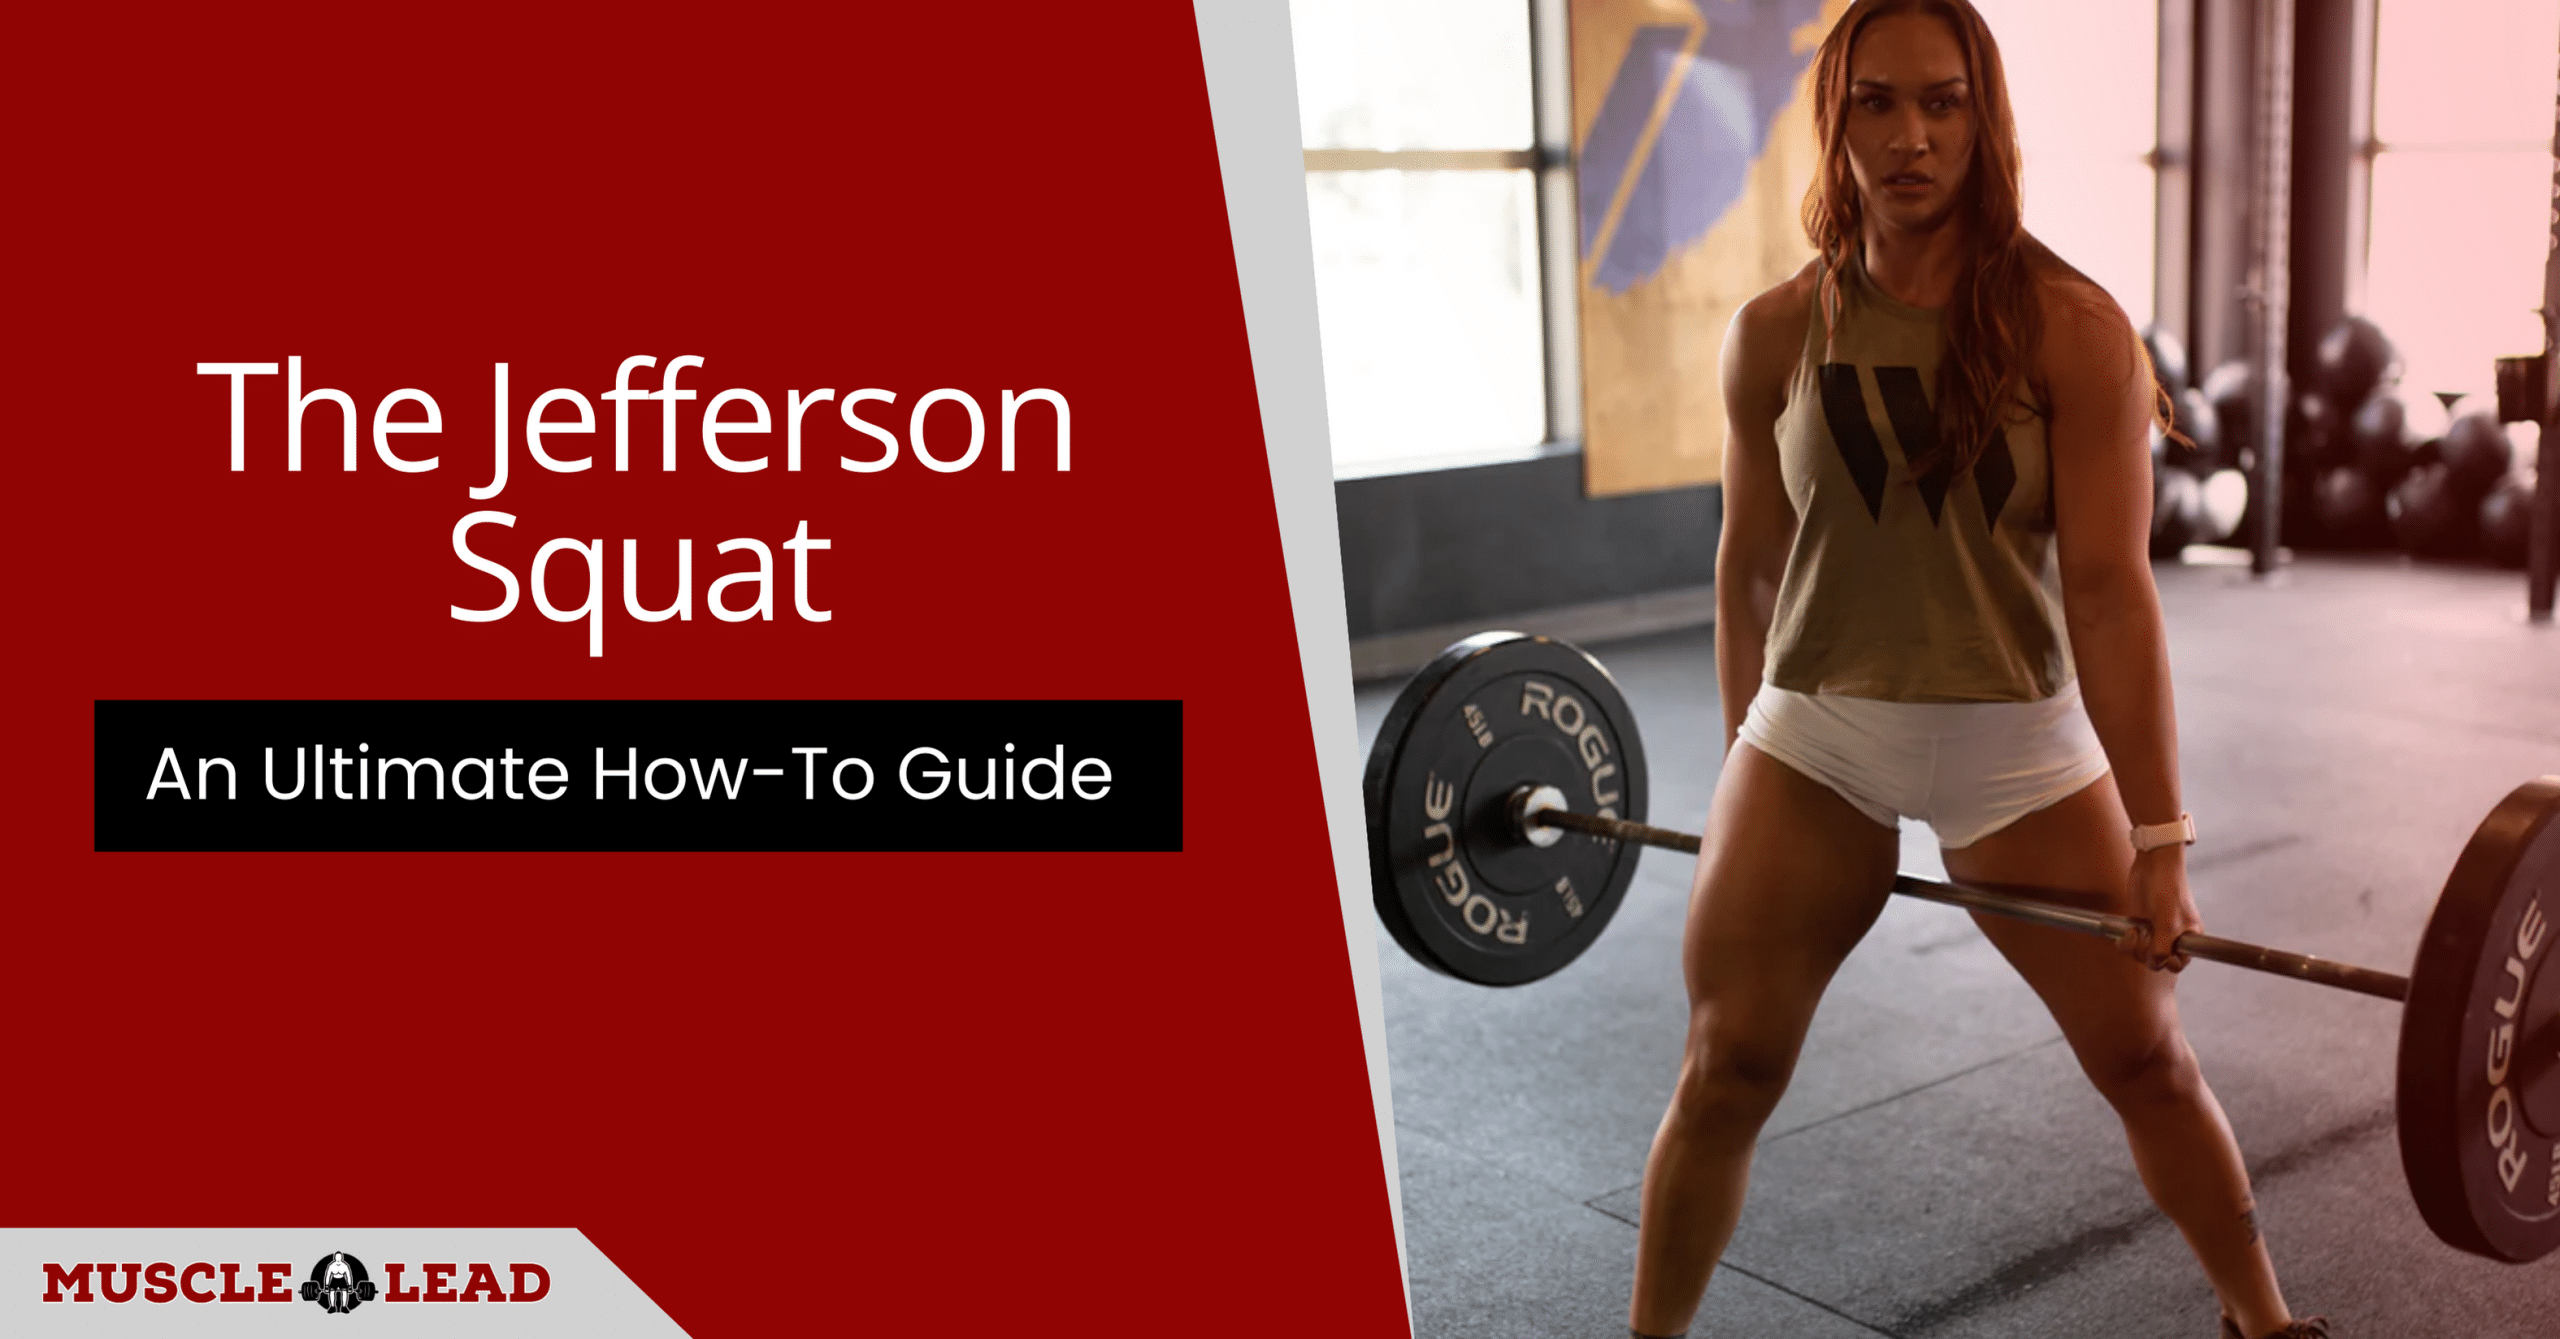 The Jefferson Squat An Ultimate How-To Guide 